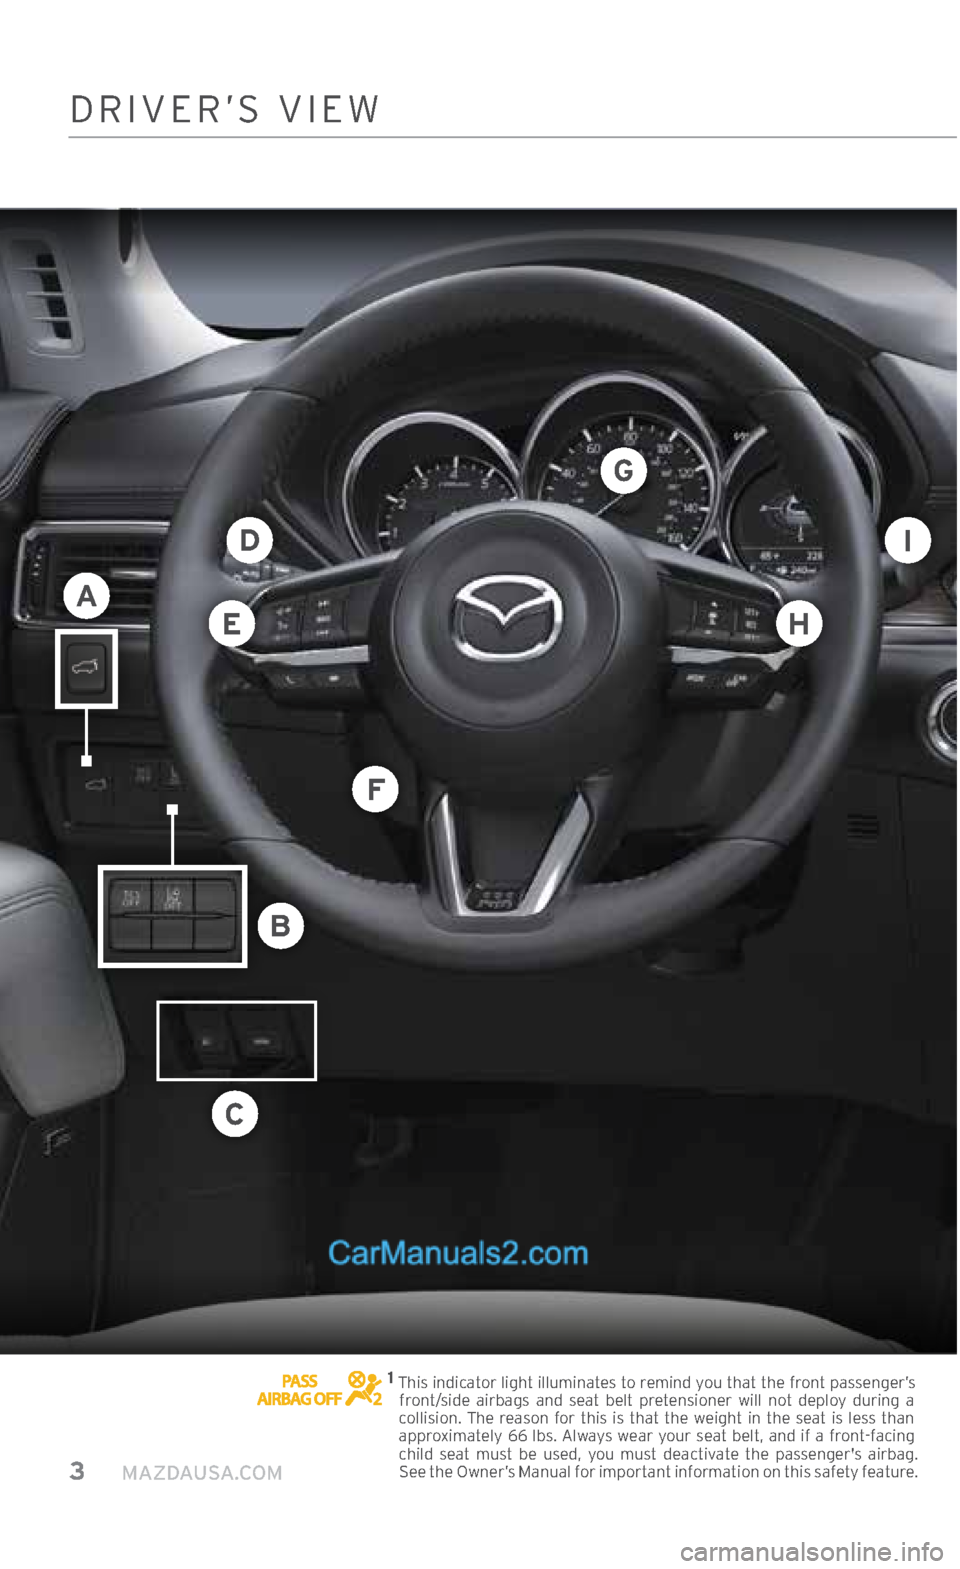 MAZDA MODEL CX-5 2017  Smart Start Guide (in English) 3     MAZDAUSA.COM
B
C
1  
This indicator light illuminates to remind you that the front passenger’s 
front/side airbags and seat belt pretensioner will not deploy during a 
collision. The reason fo